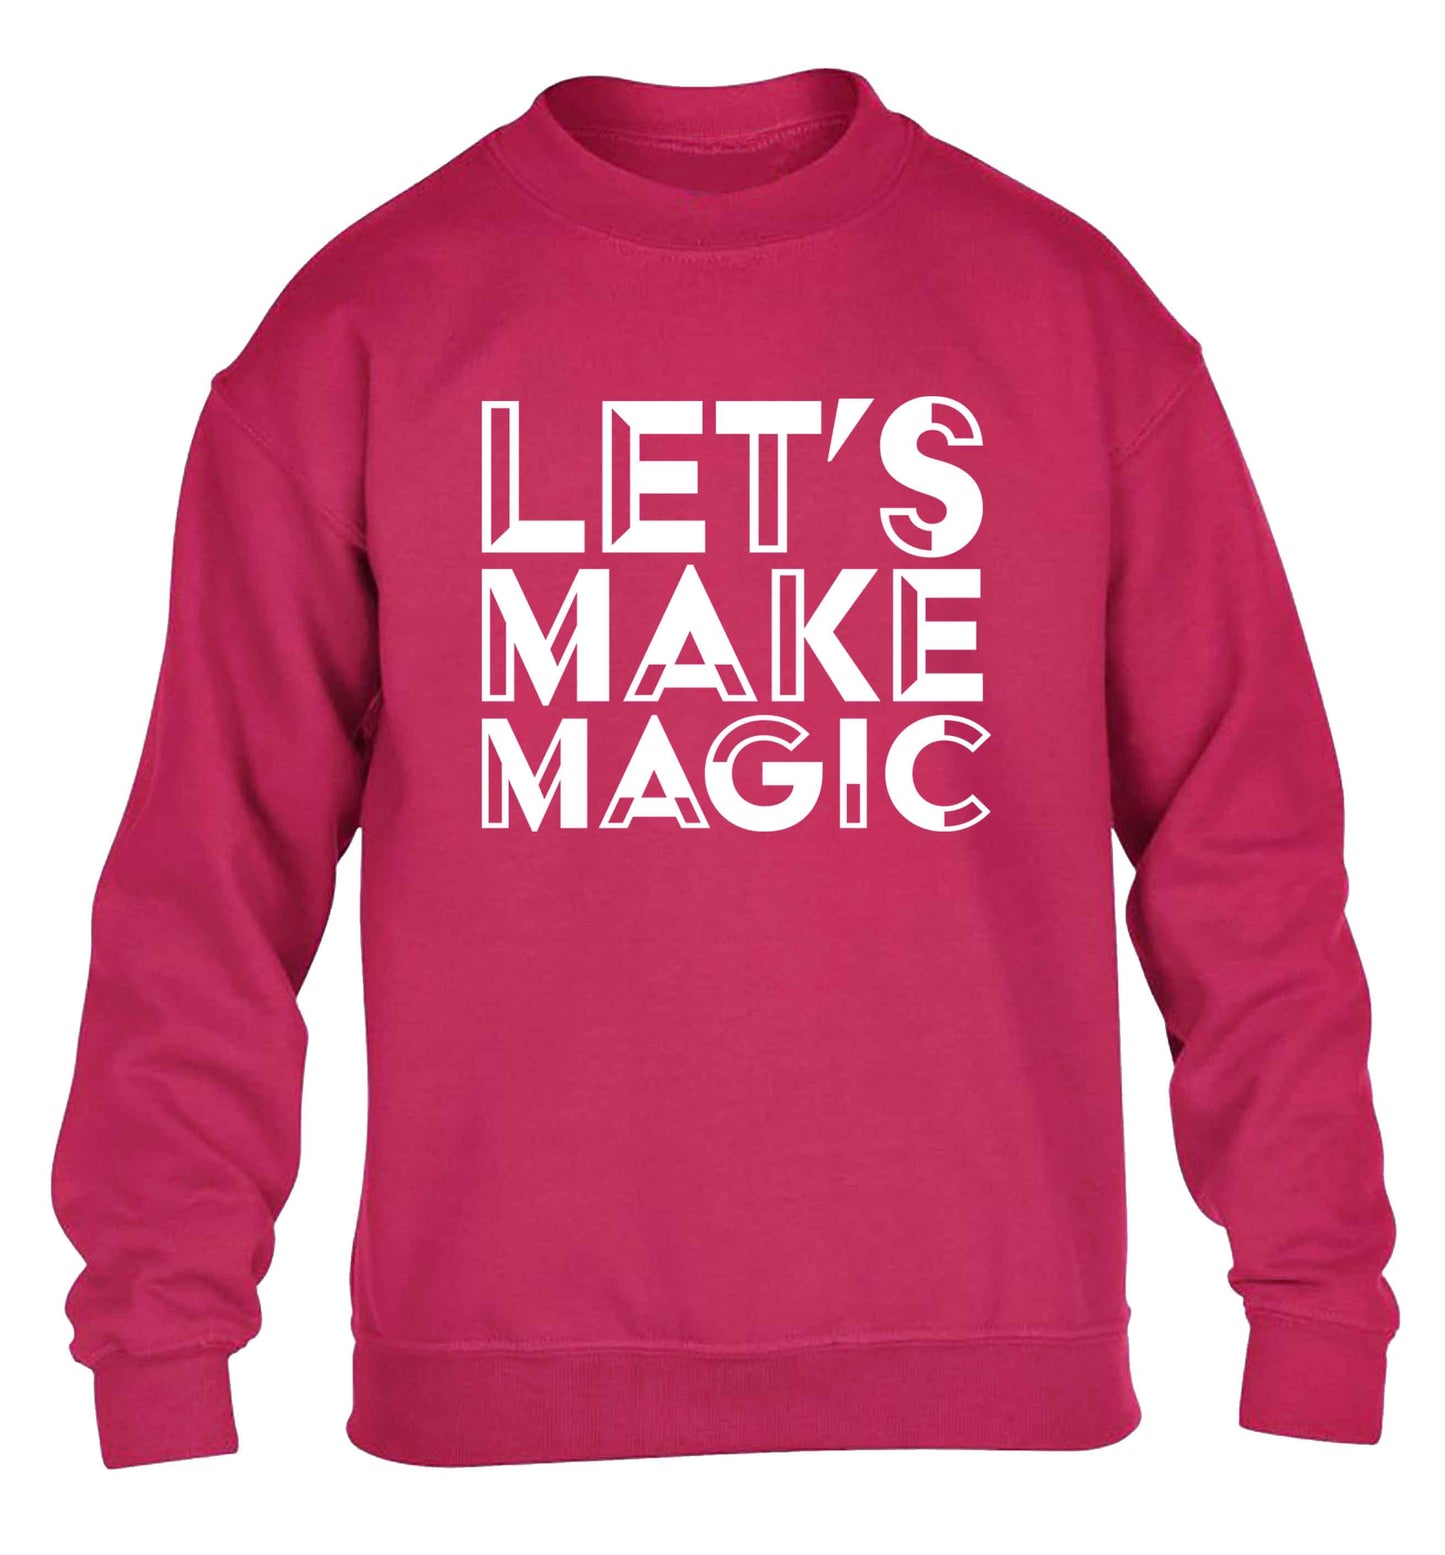 Let's make magic children's pink sweater 12-13 Years